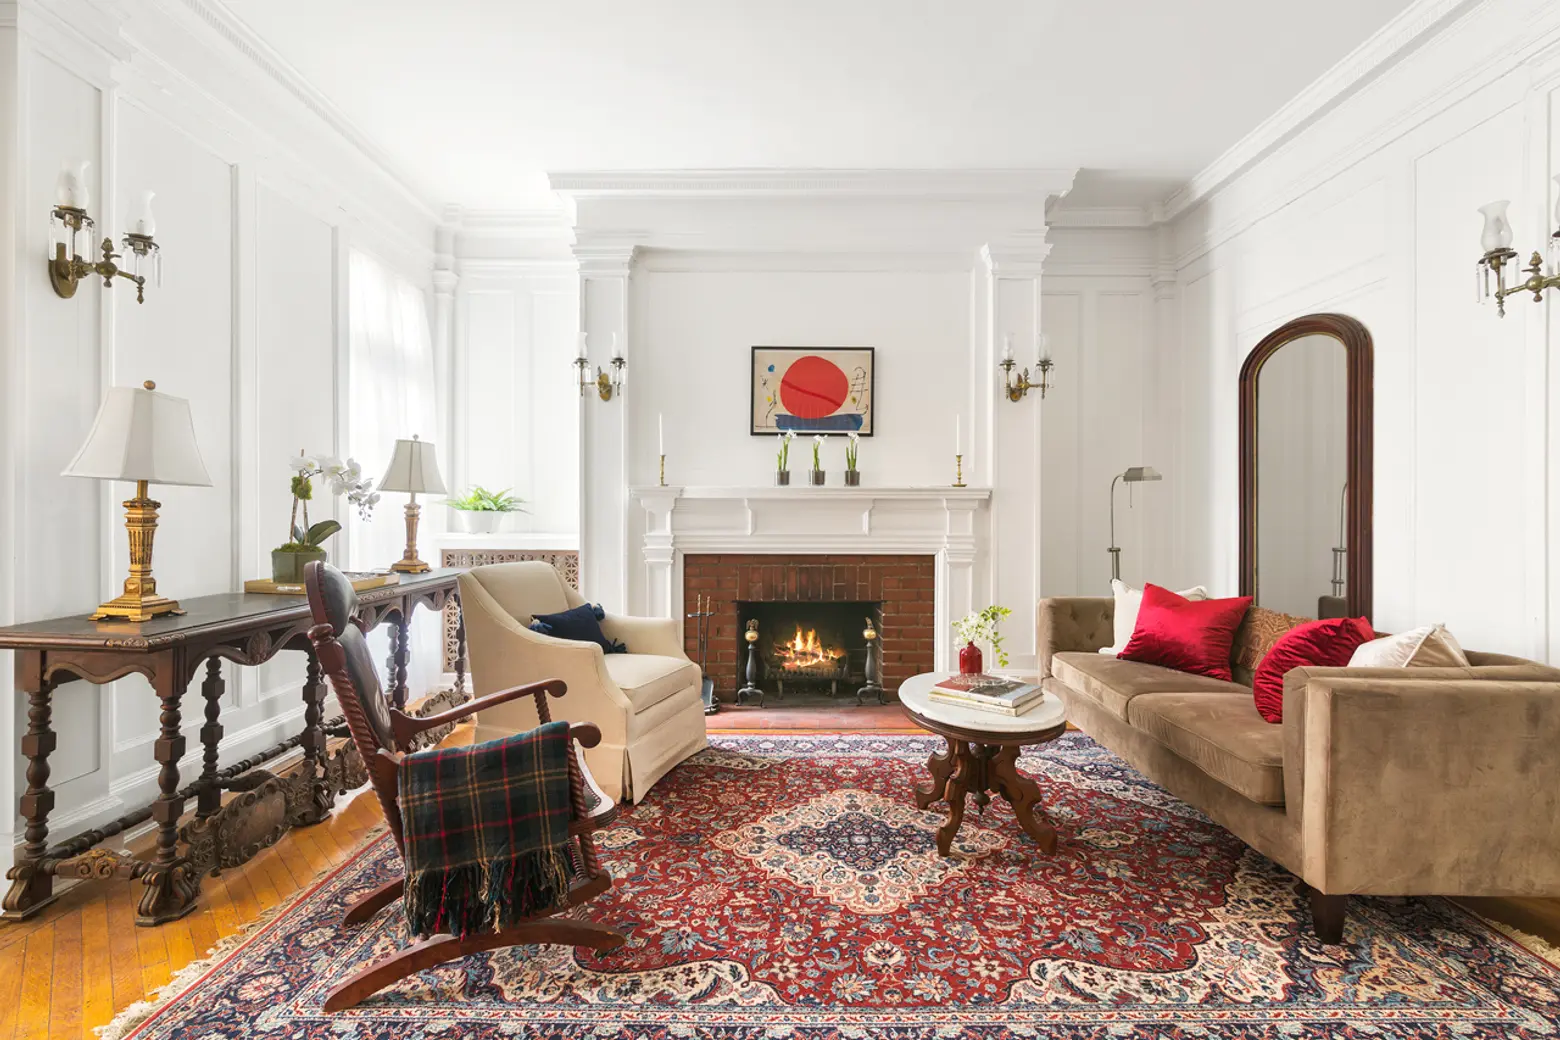 $5M Park Slope mansion was built as a gift of love from an architect to his bride